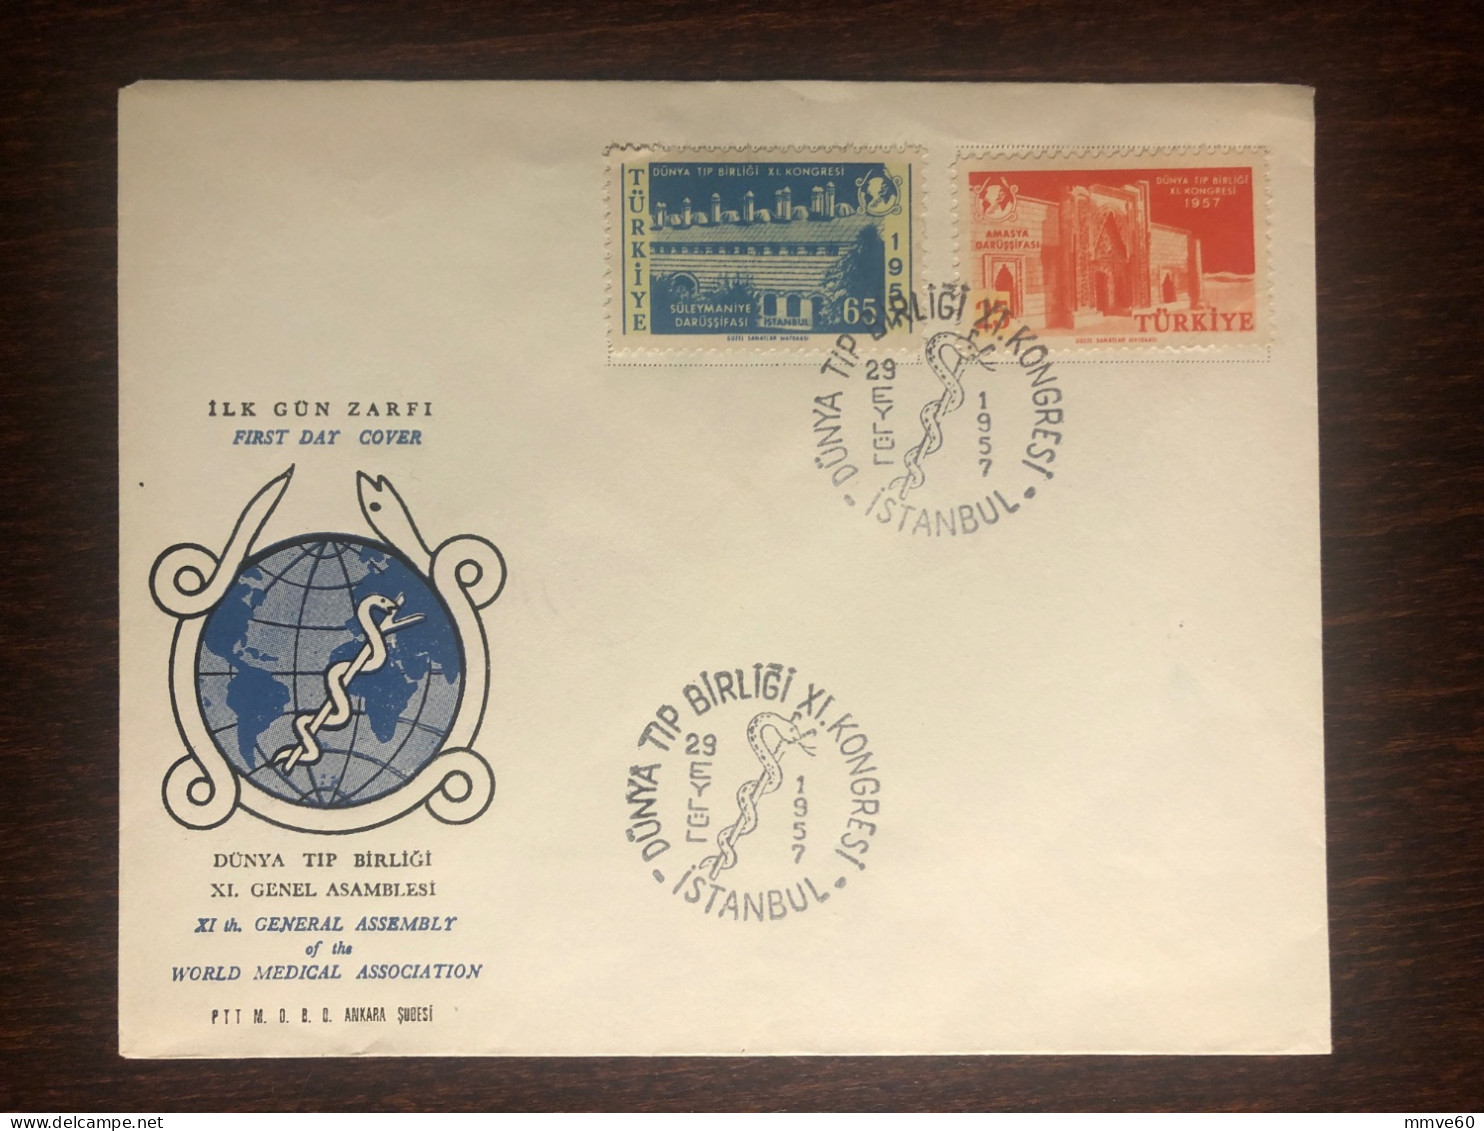 TURKEY FDC COVER 1957 YEAR MEDICAL CENTER HEALTH MEDICINE STAMPS - FDC